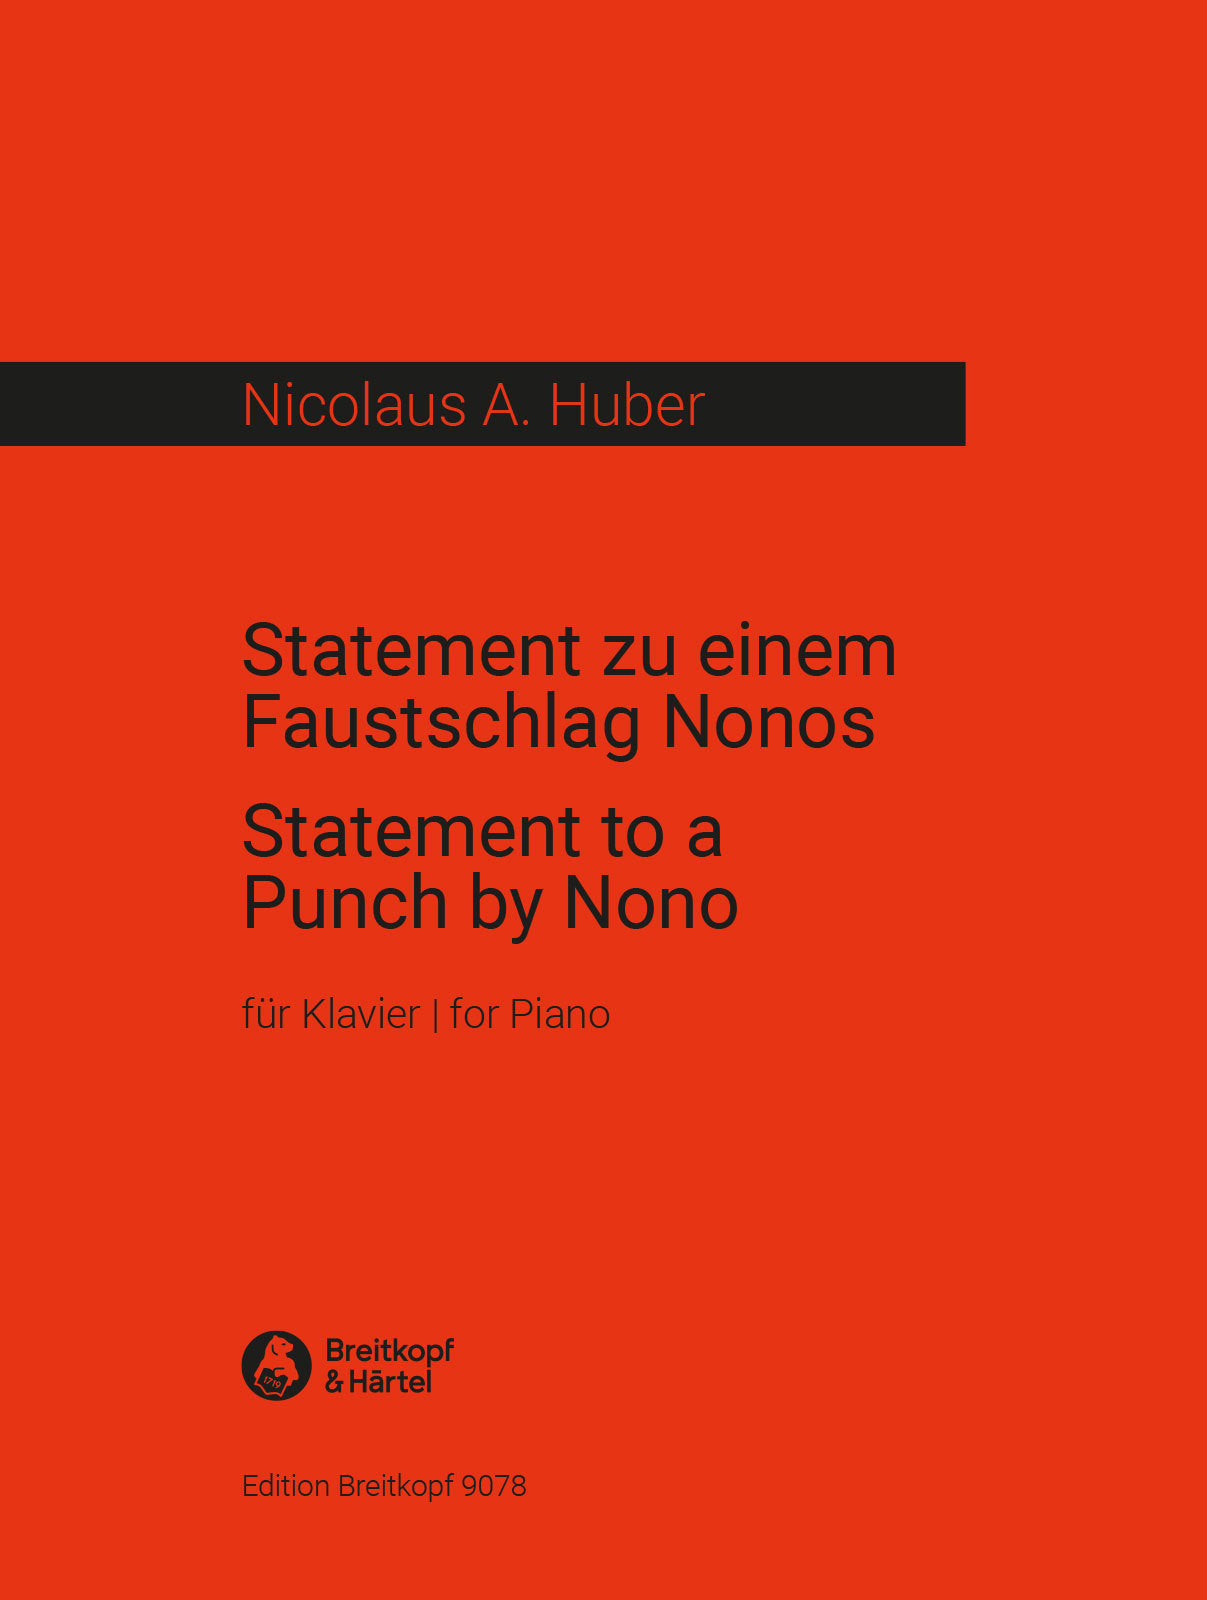 Huber: Statement to a Punch by Nono